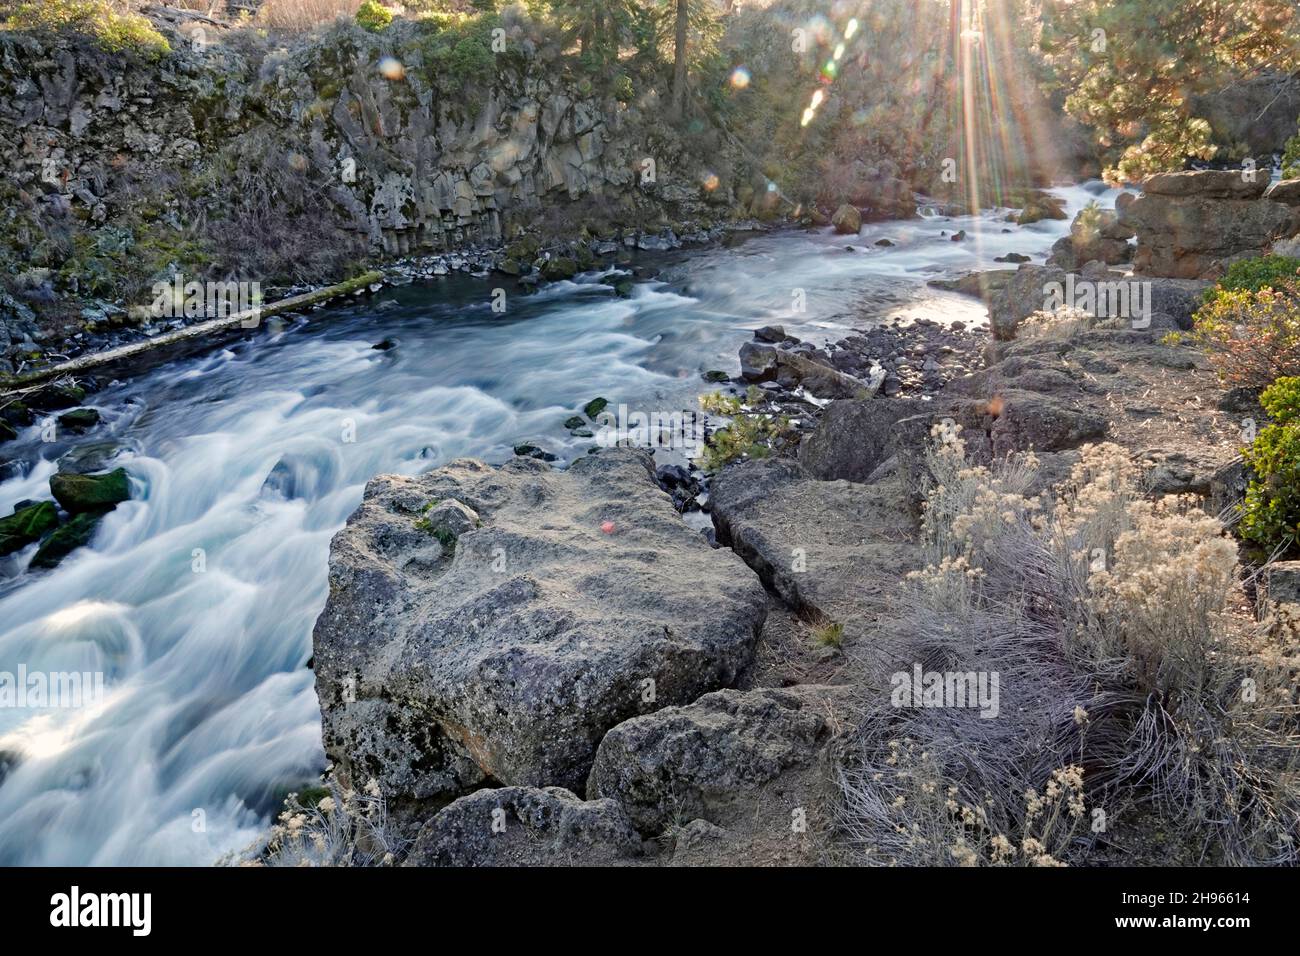 A section of  Dillon Falls lit by a sun flare on the Deschutes River in central Oregon near the city of Bend. Stock Photo